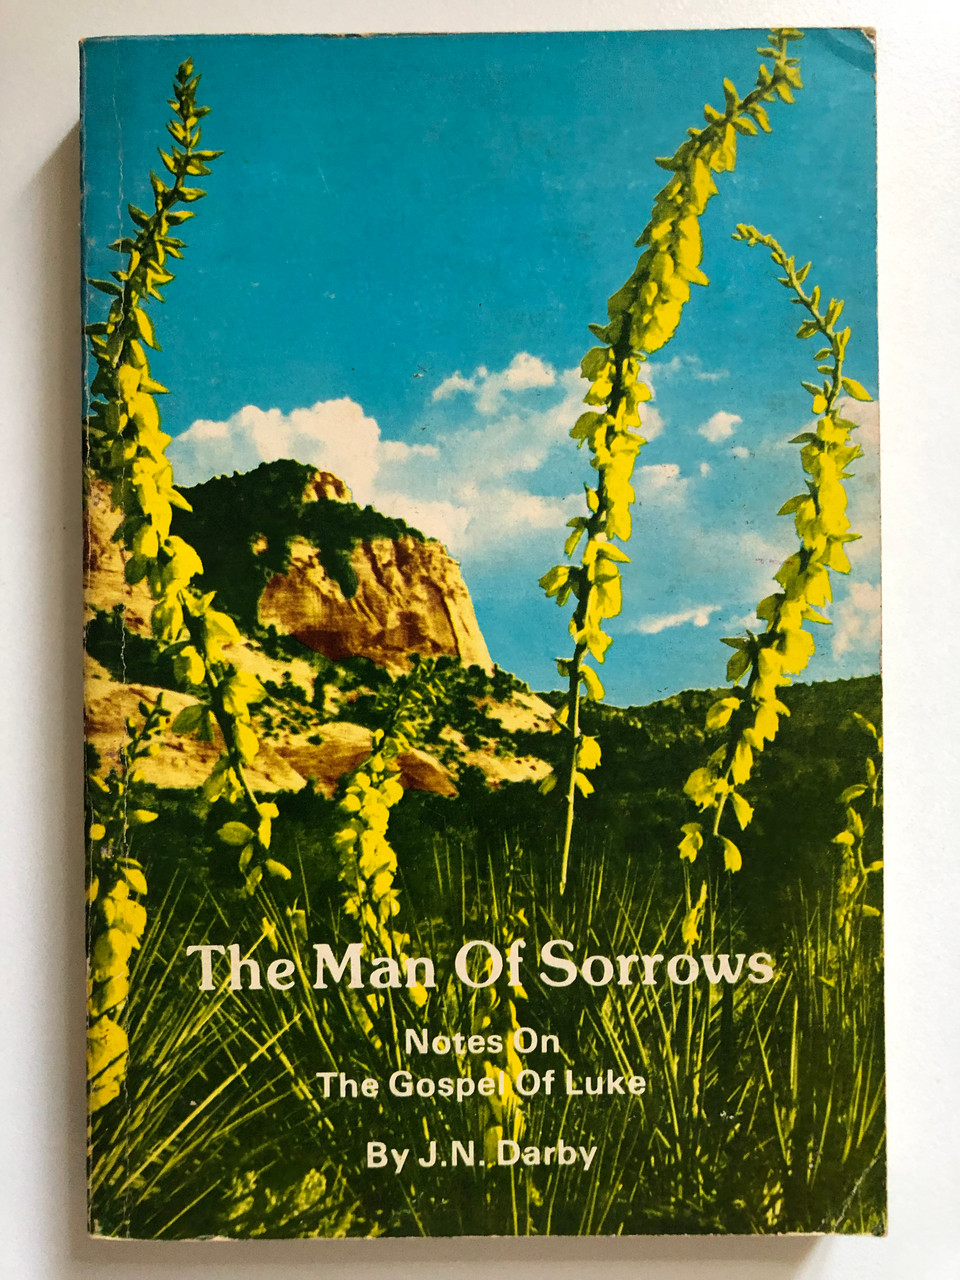 The_Man_Of_Sorrows_by_John_Nelson_Darby_Chapter_by_chapter_commentary_on_the_Gospel_of_Luke_Publisher_BIBLE_TRUTH_PUBLISHERS_JNDarby_3__94223.1691332281.1280.1280.JPG (960×1280)